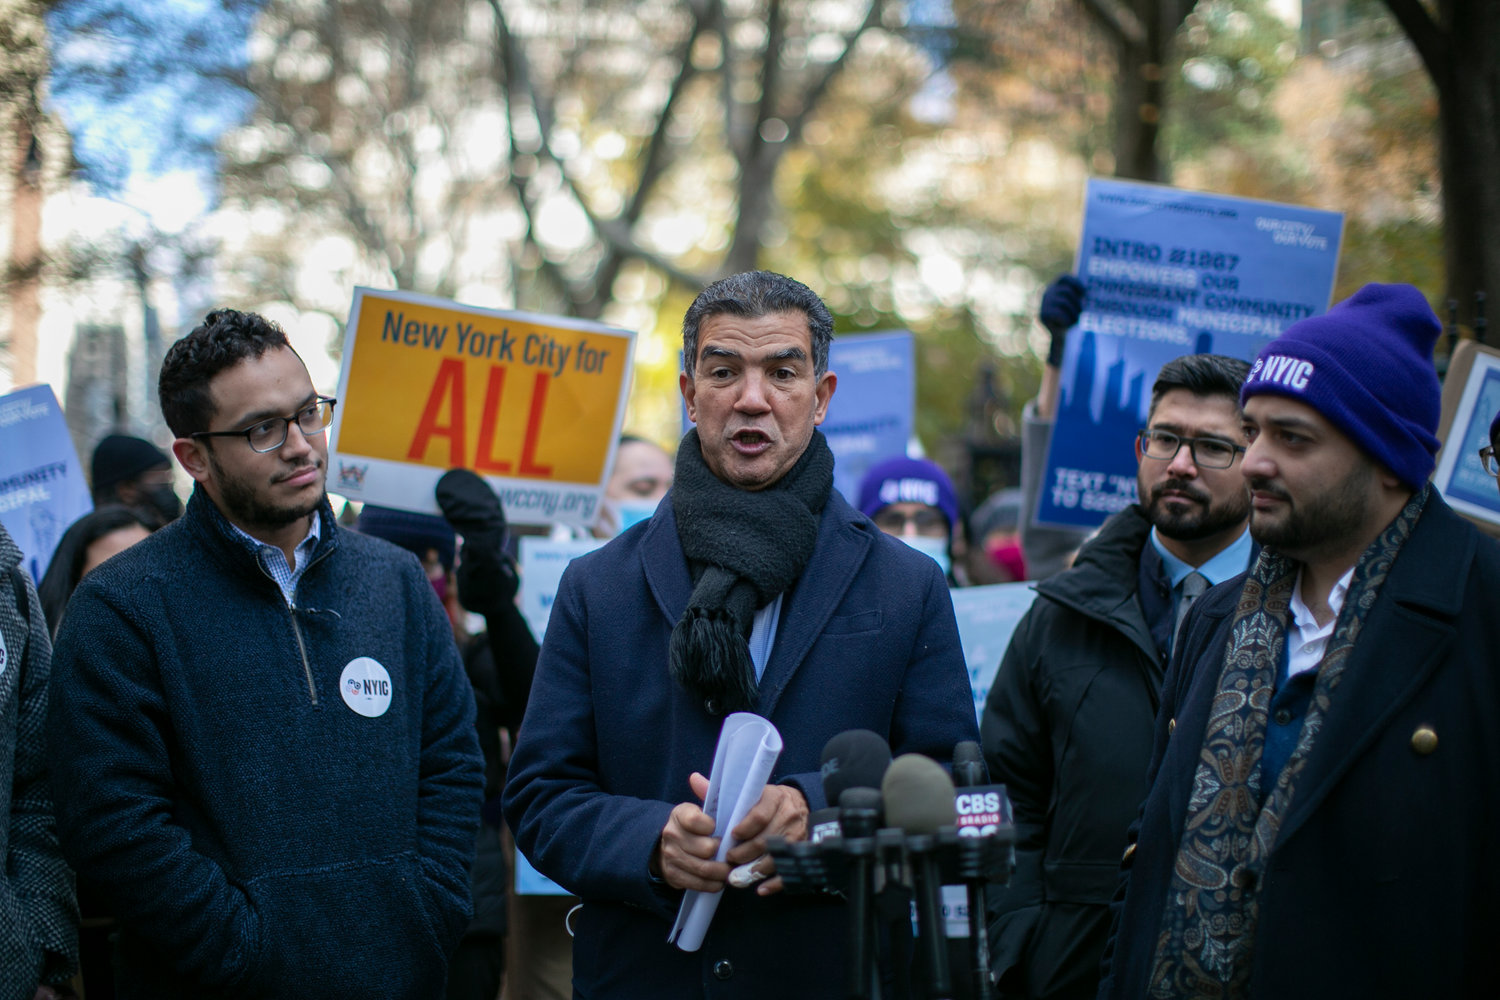 Councilman Ydanis Rodriguez rallied with several of his City Hall colleagues and advocates to pass his ‘Our City, Our Vote’ bill. The legislation would give voting rights to the roughly 800,000 non-citizens living in New York City.